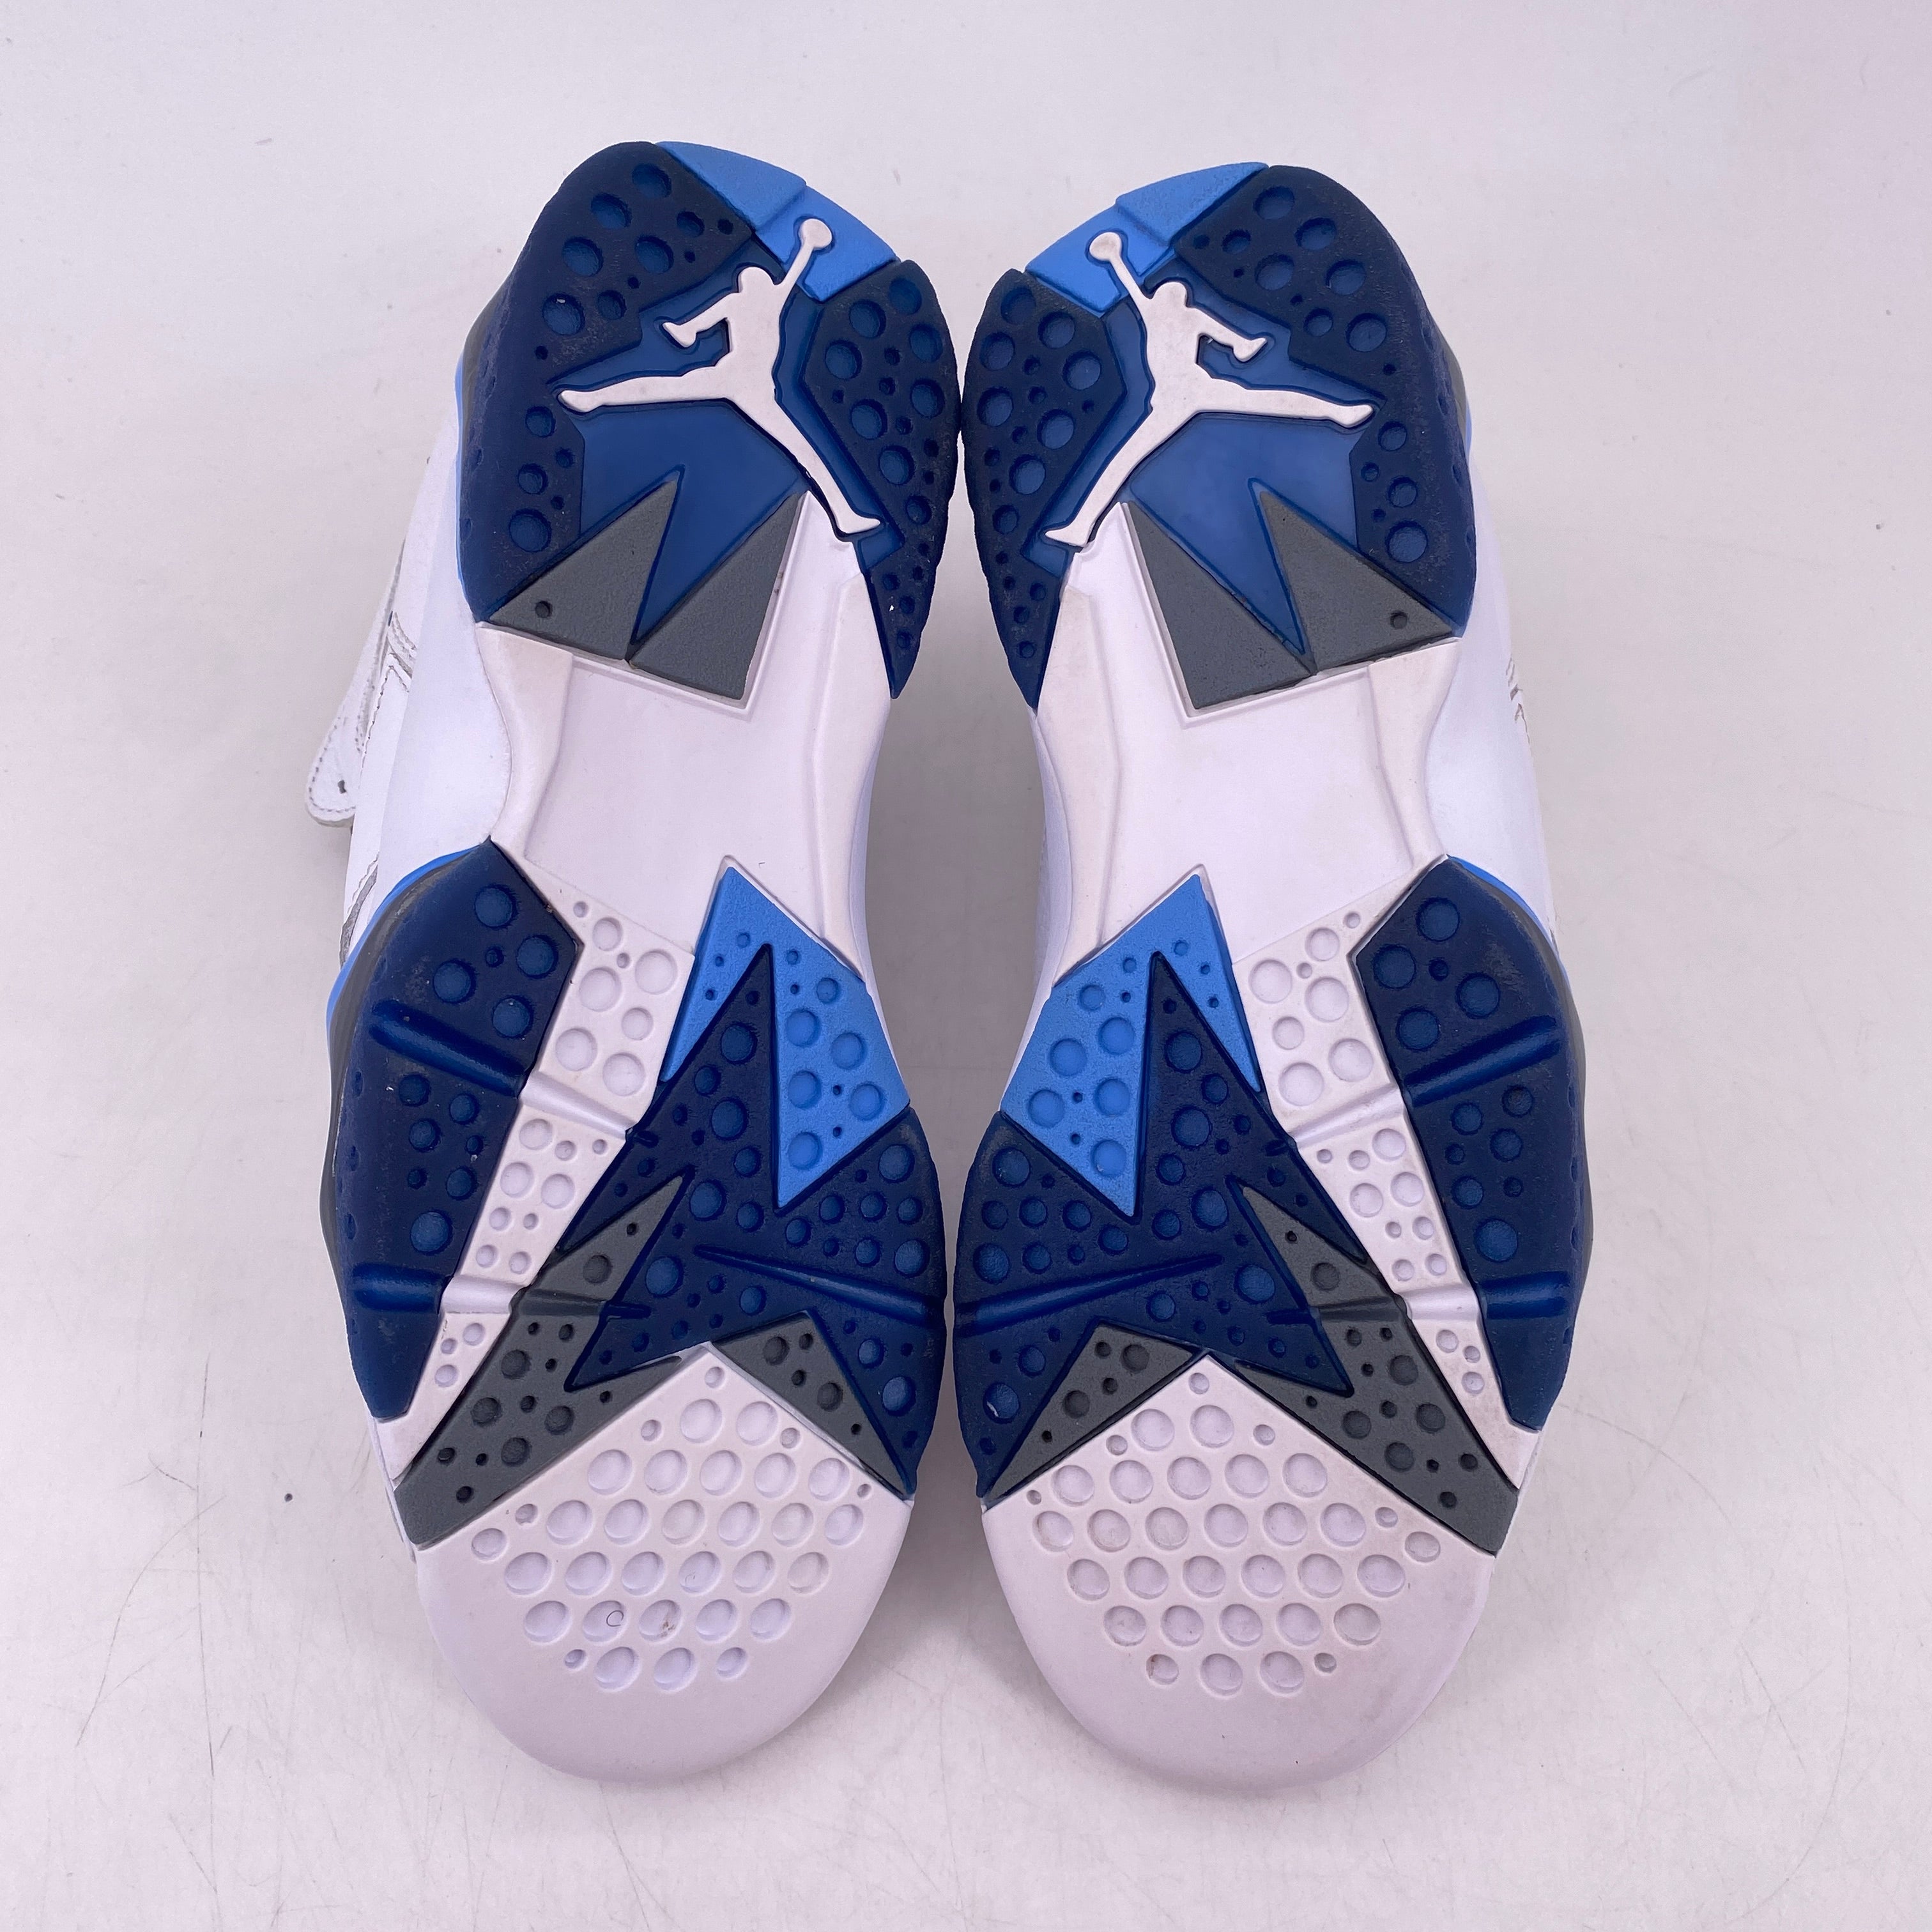 Air Jordan 7 Retro &quot;French Blue&quot; 2015 Used Size 8